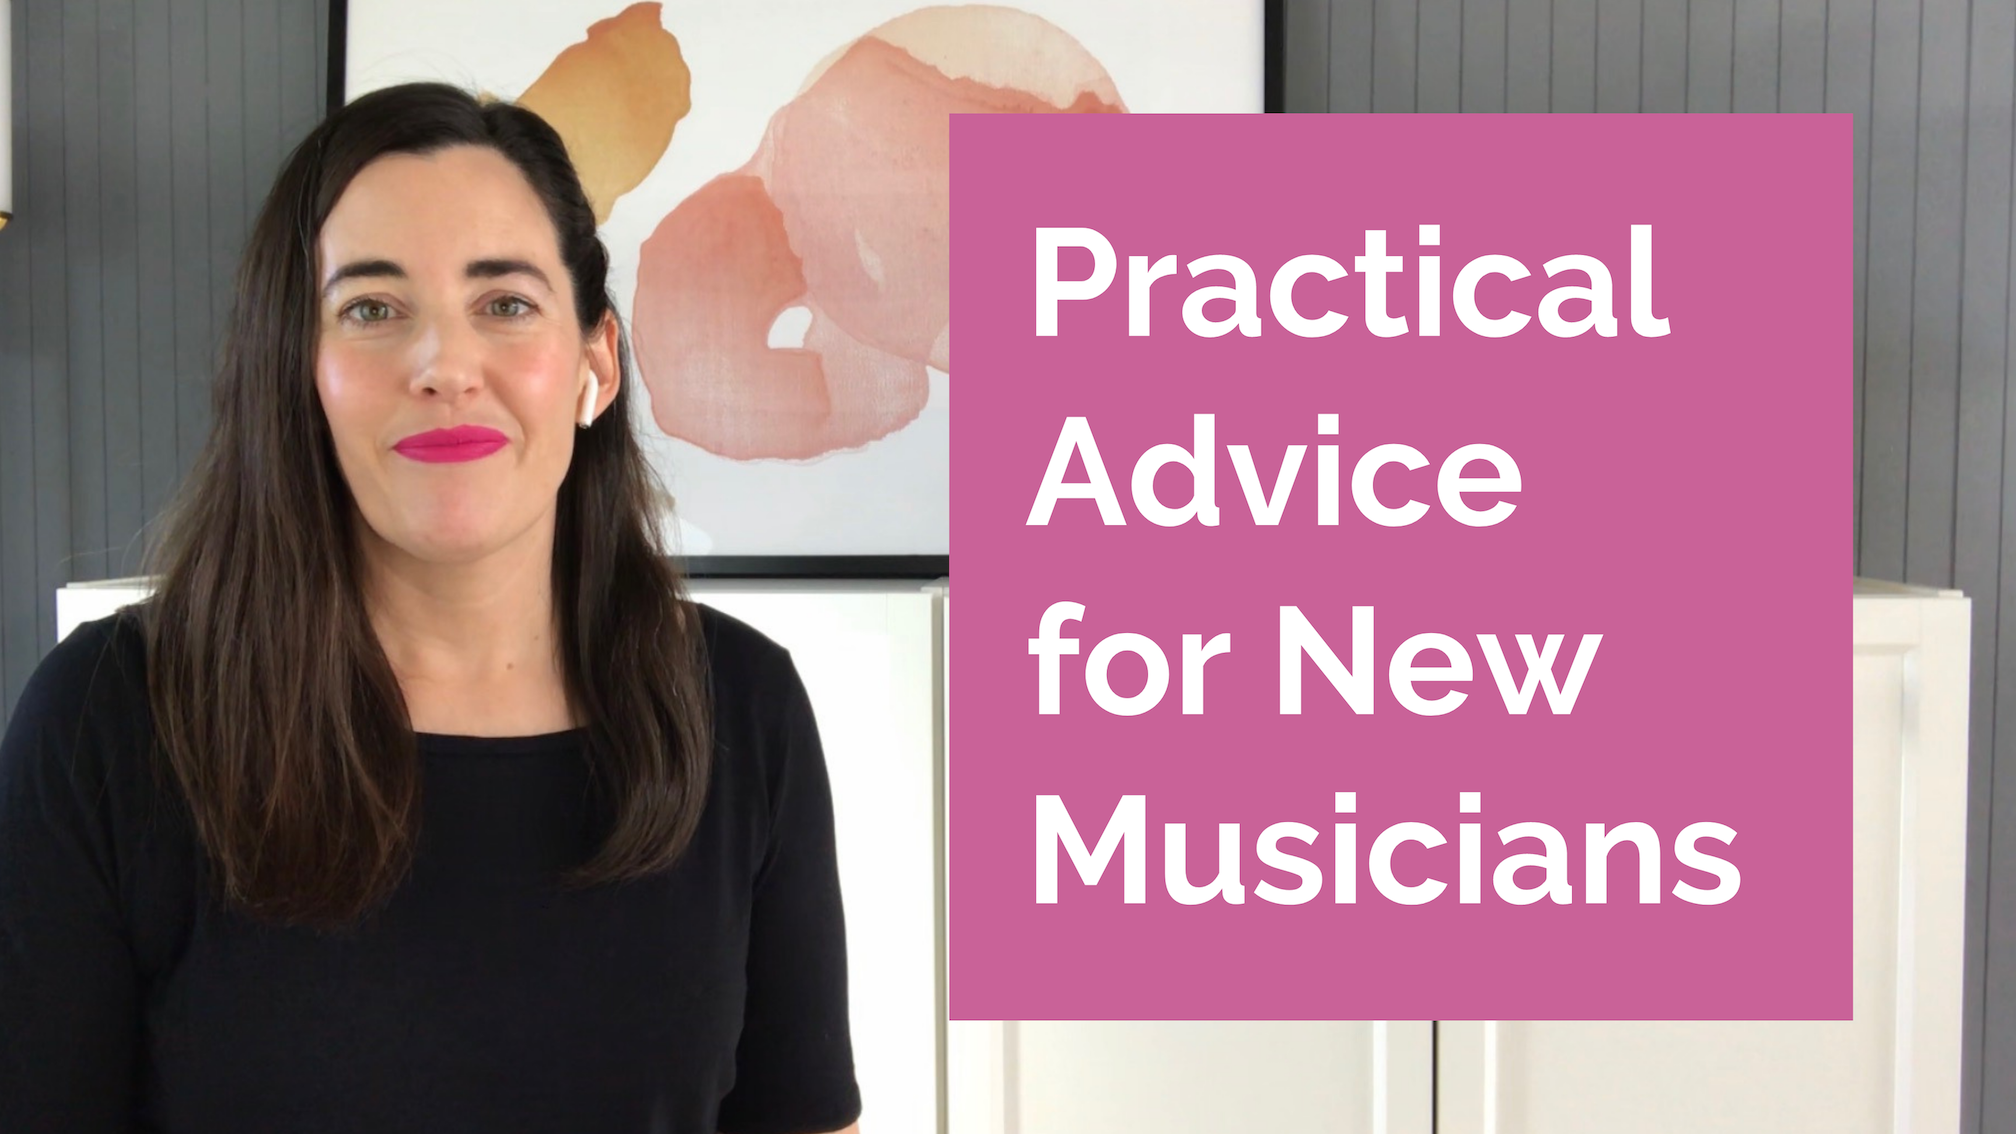 Practical Advice for New Musicians